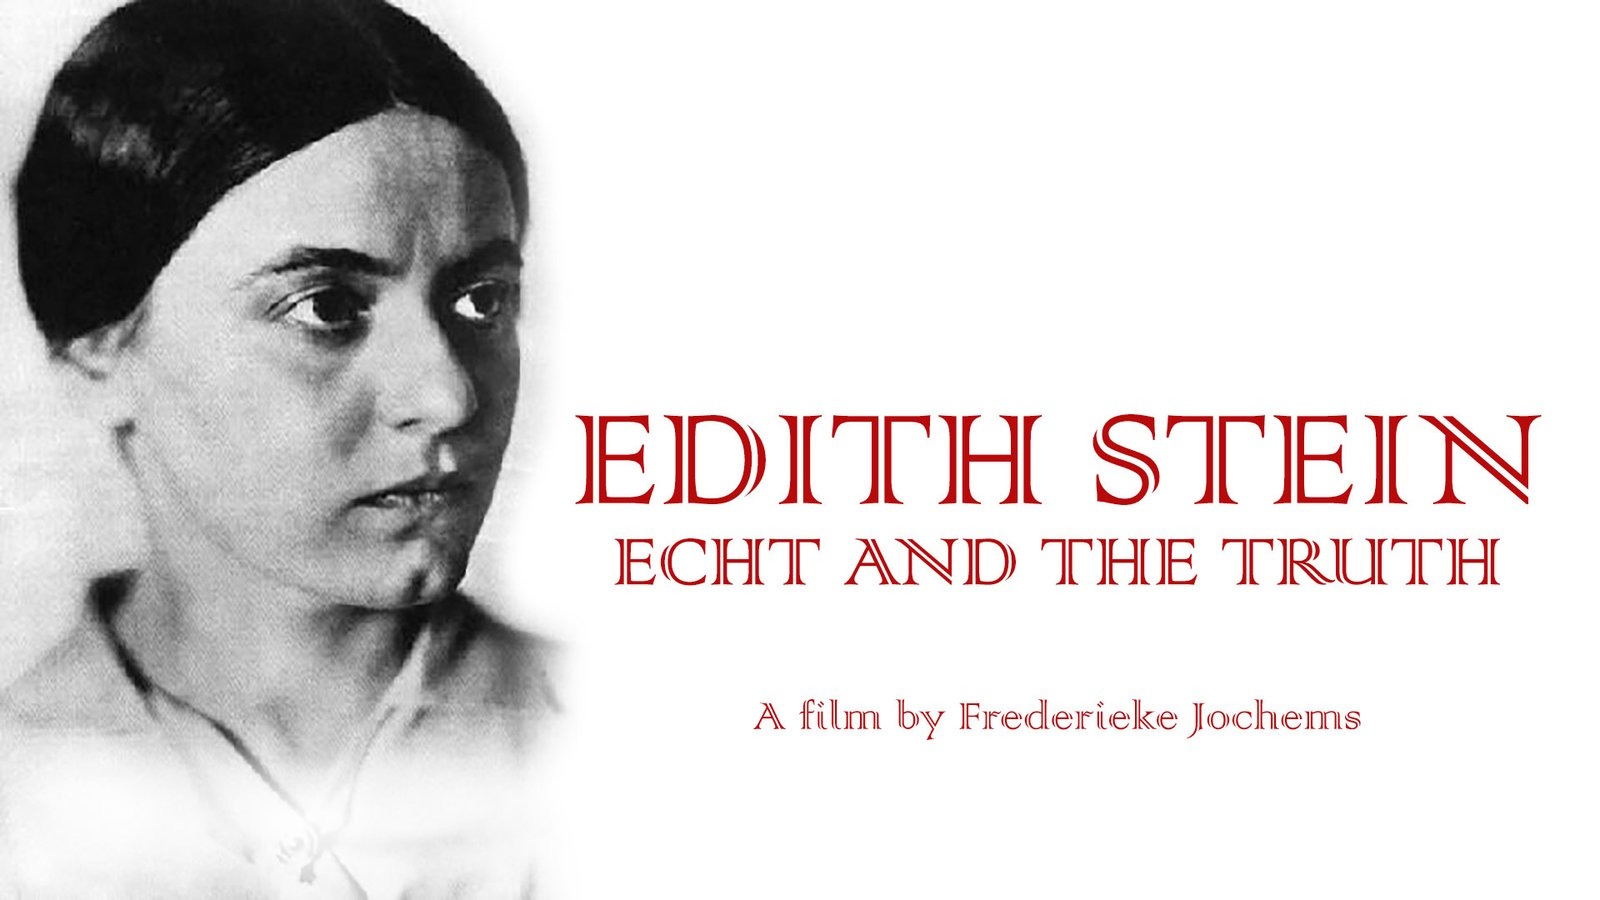 Edith Stein: Echt and the Truth - The Story of a German Philosopher and Nun